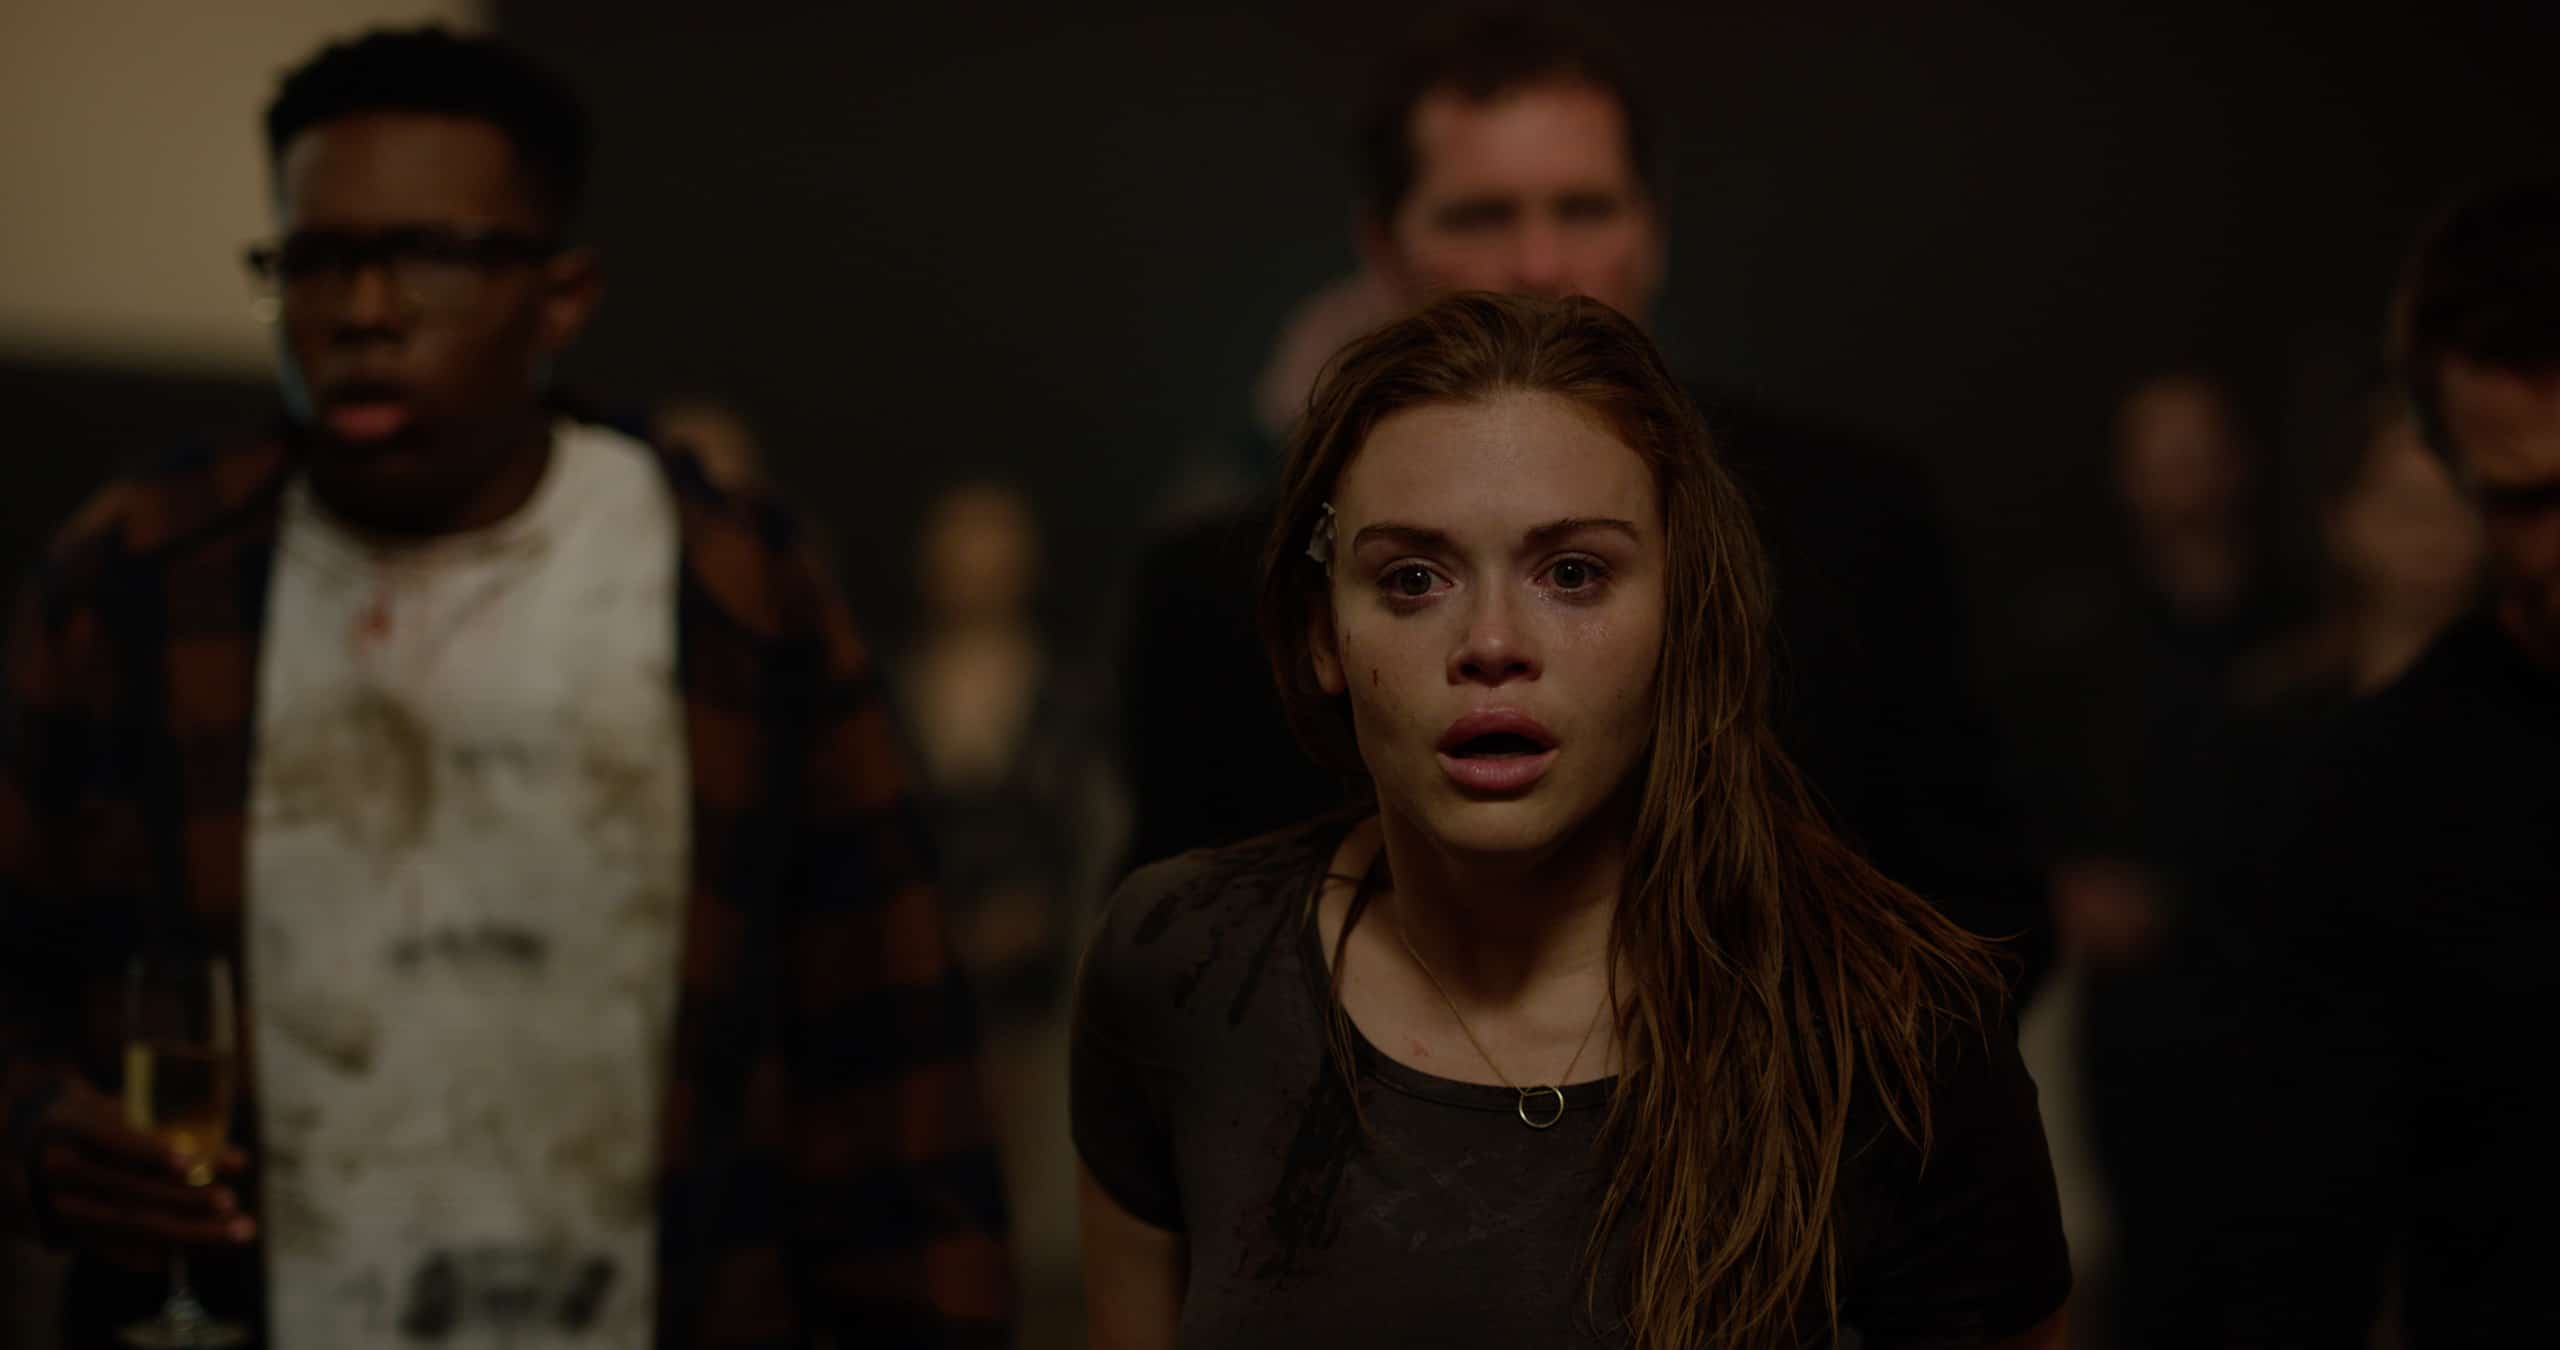 (L-R) Denzel Whitaker as Thomas and Holland Roden as Erin in the horror/thriller film “NO ESCAPE” a Vertical Entertainment release. Photo courtesy of Vertical Entertainment.